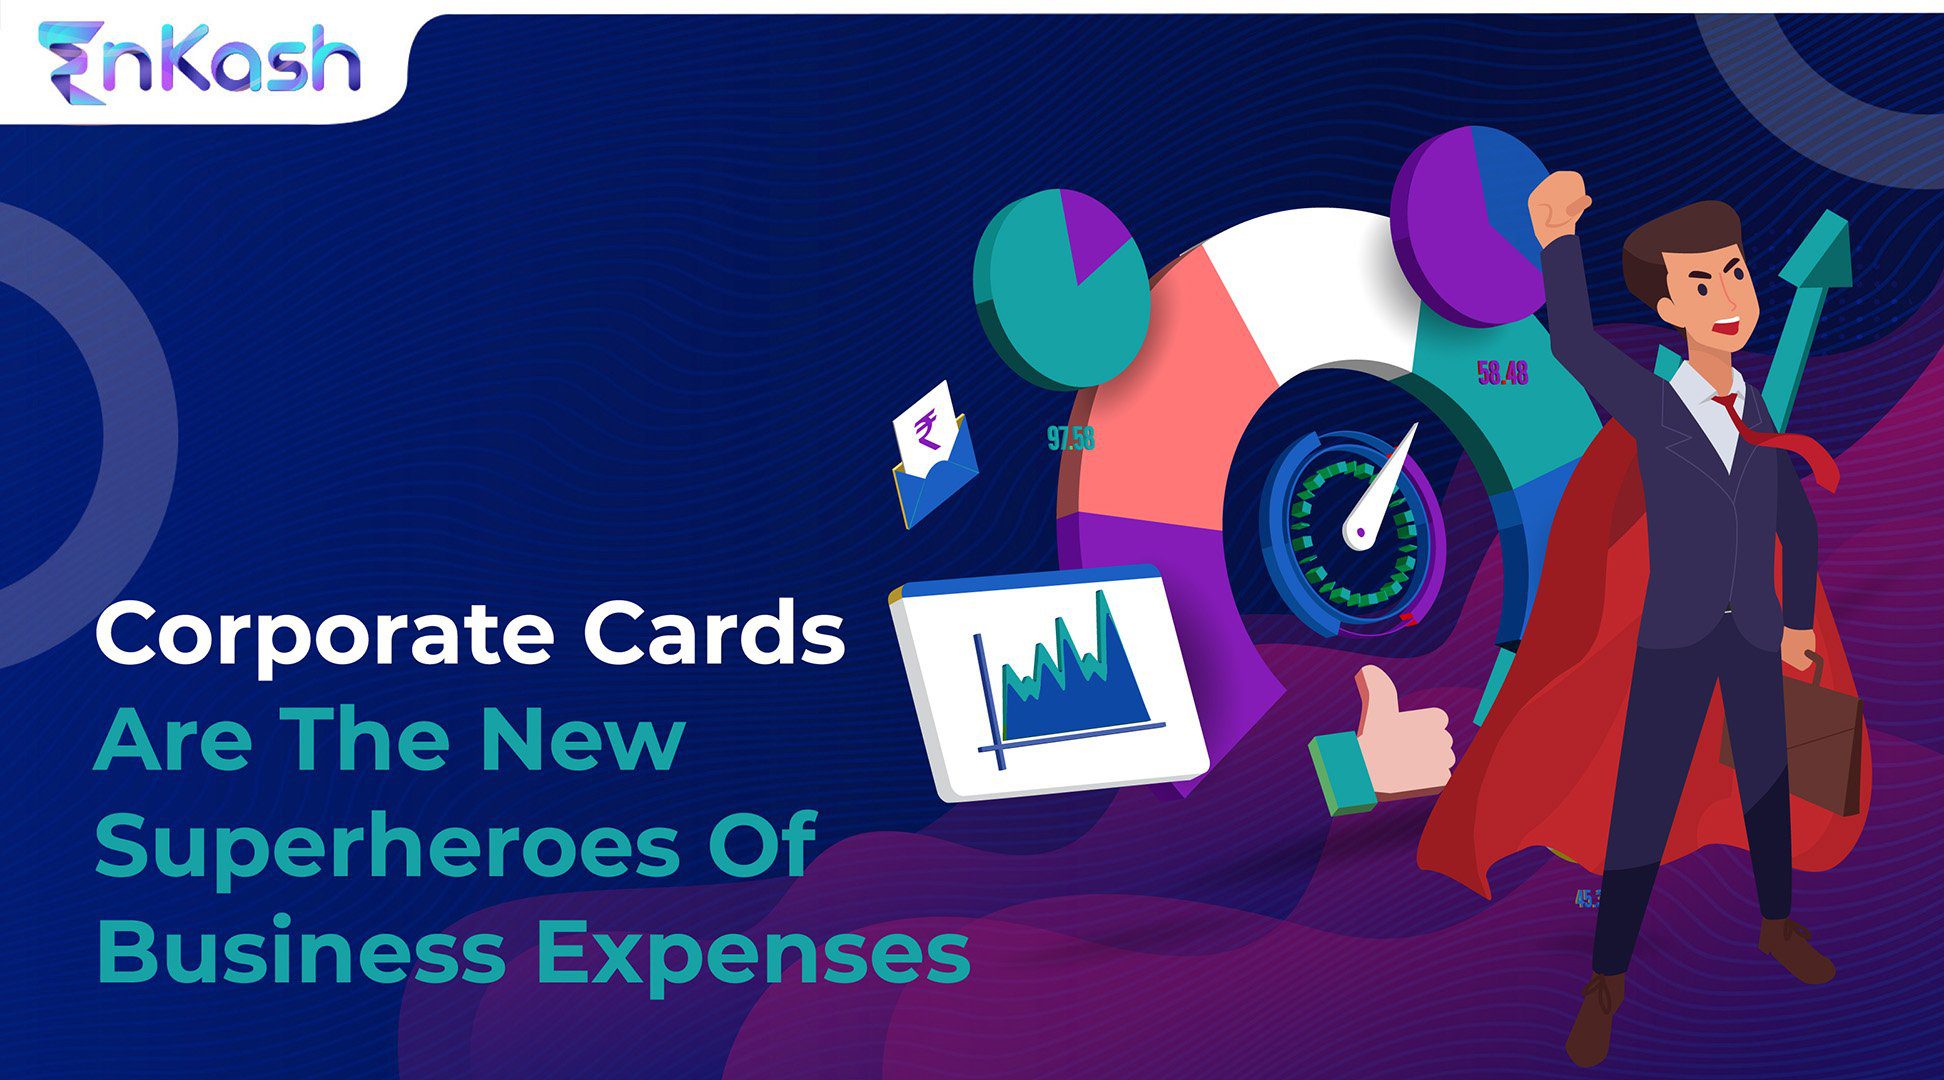 How to Manage Business Expenses With Corporate Cards?